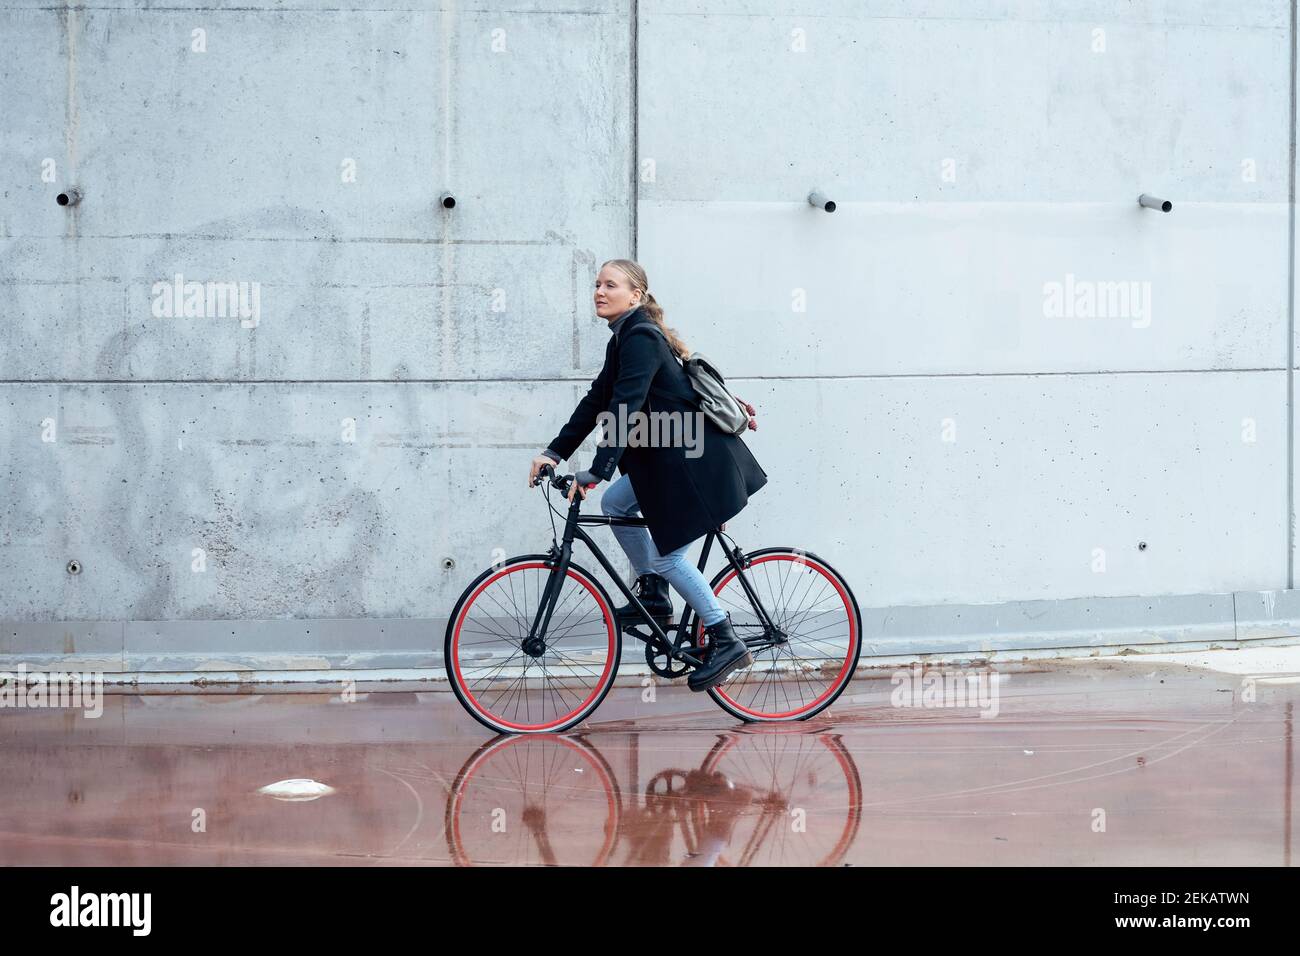 Woman doing cycling on wet road by wall Stock Photo